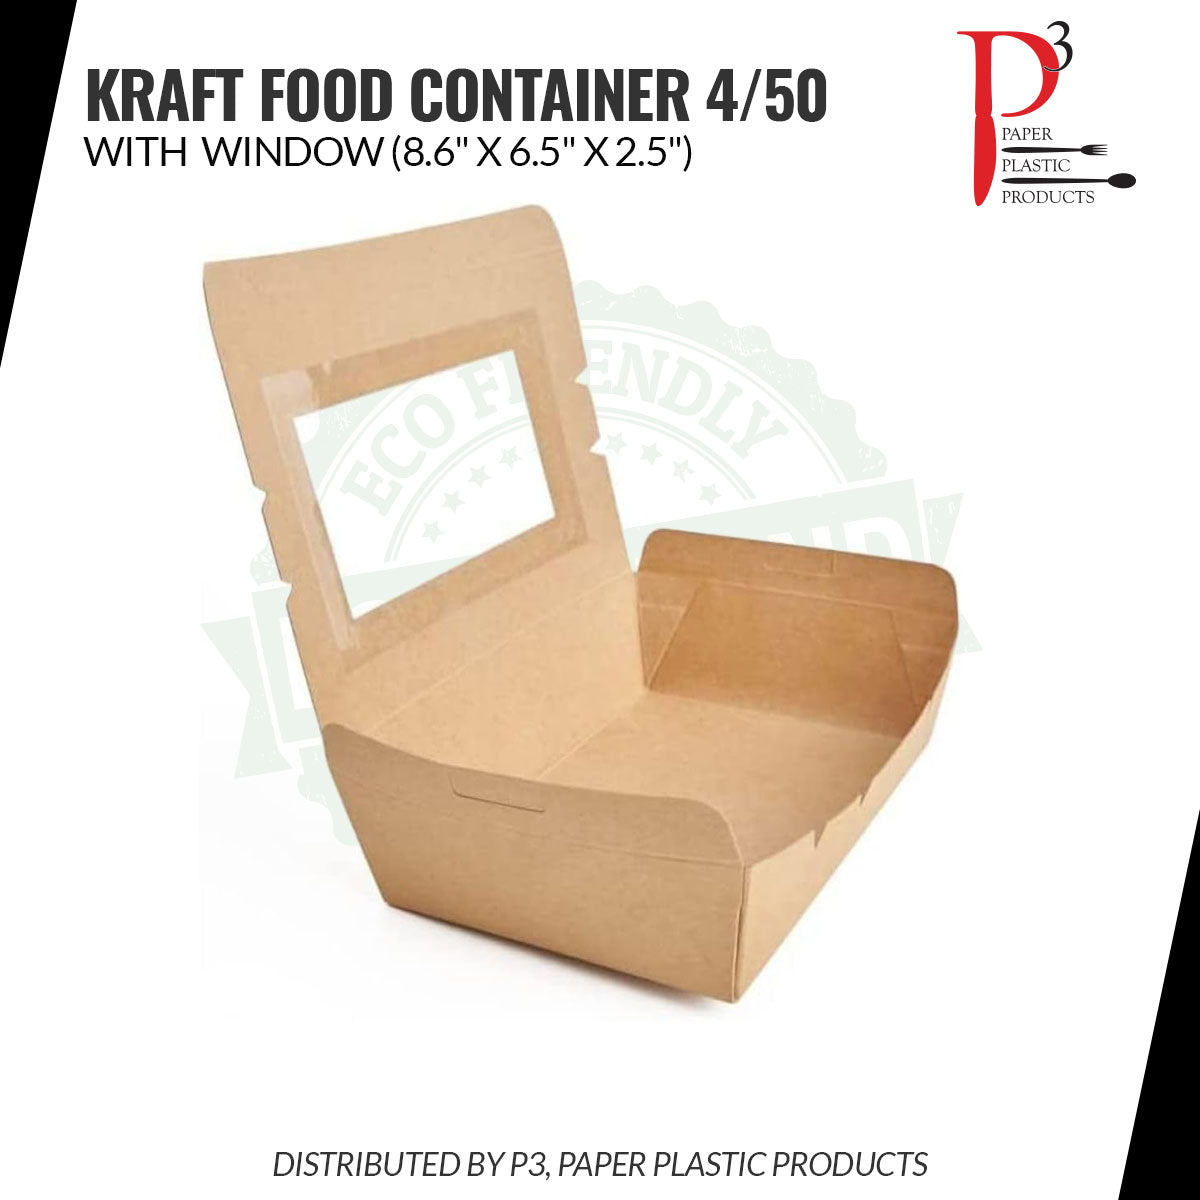 Kraft Food Container with window 8.6